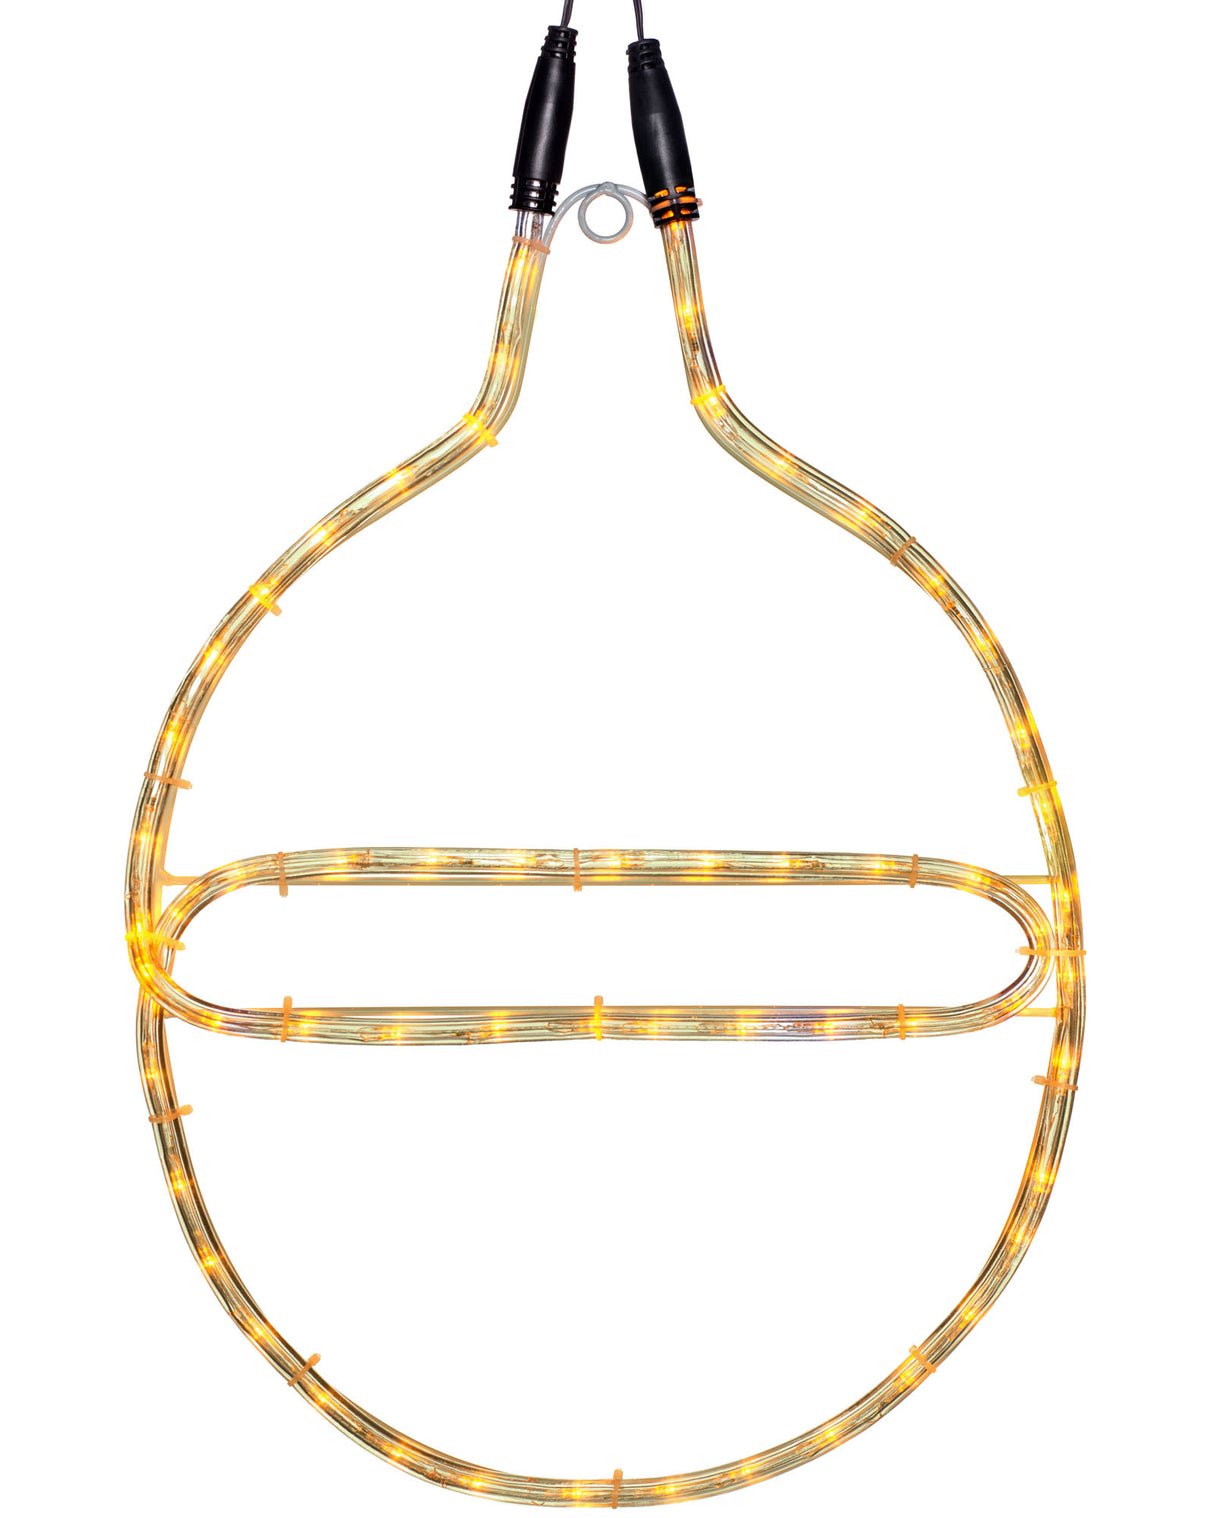 Connectable Bauble Rope Light Silhouette, Yellow, 54 cm